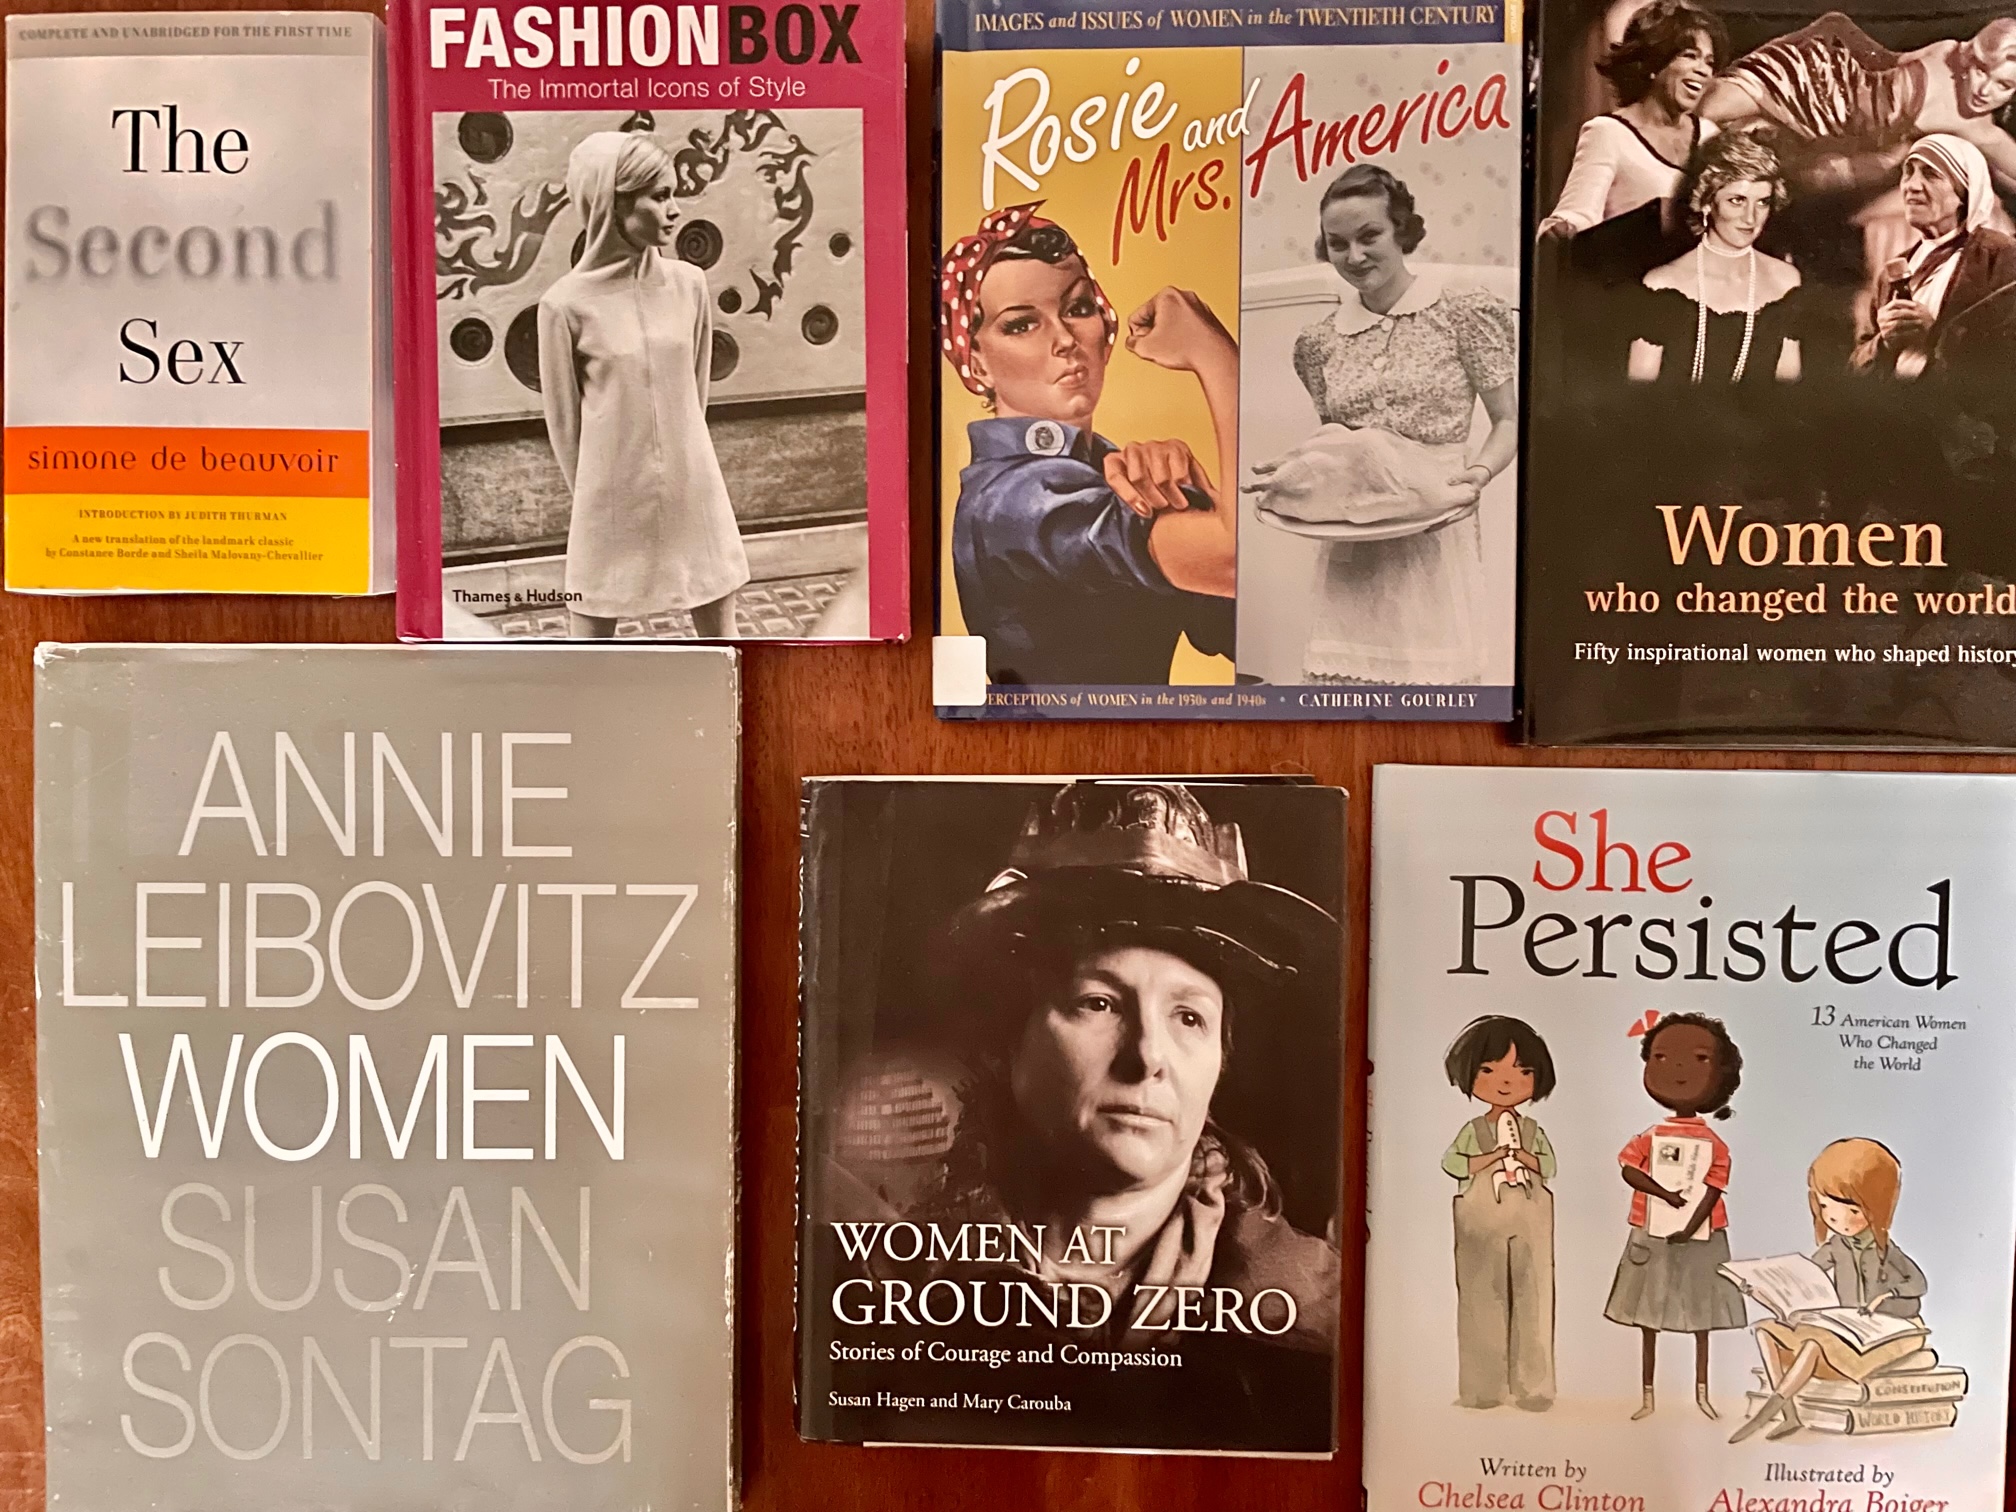 Photo of the book auction table. The books are: The Second Sex, Fashion Box: The Immortal Icons of Style, Rose and Mrs. America: Images and Issues of Women in the Twentieth Century, Women Who Changed the World, Women by Annie Leibovitz and Susan Sontag, Women at Ground Zero, and She Persisted.